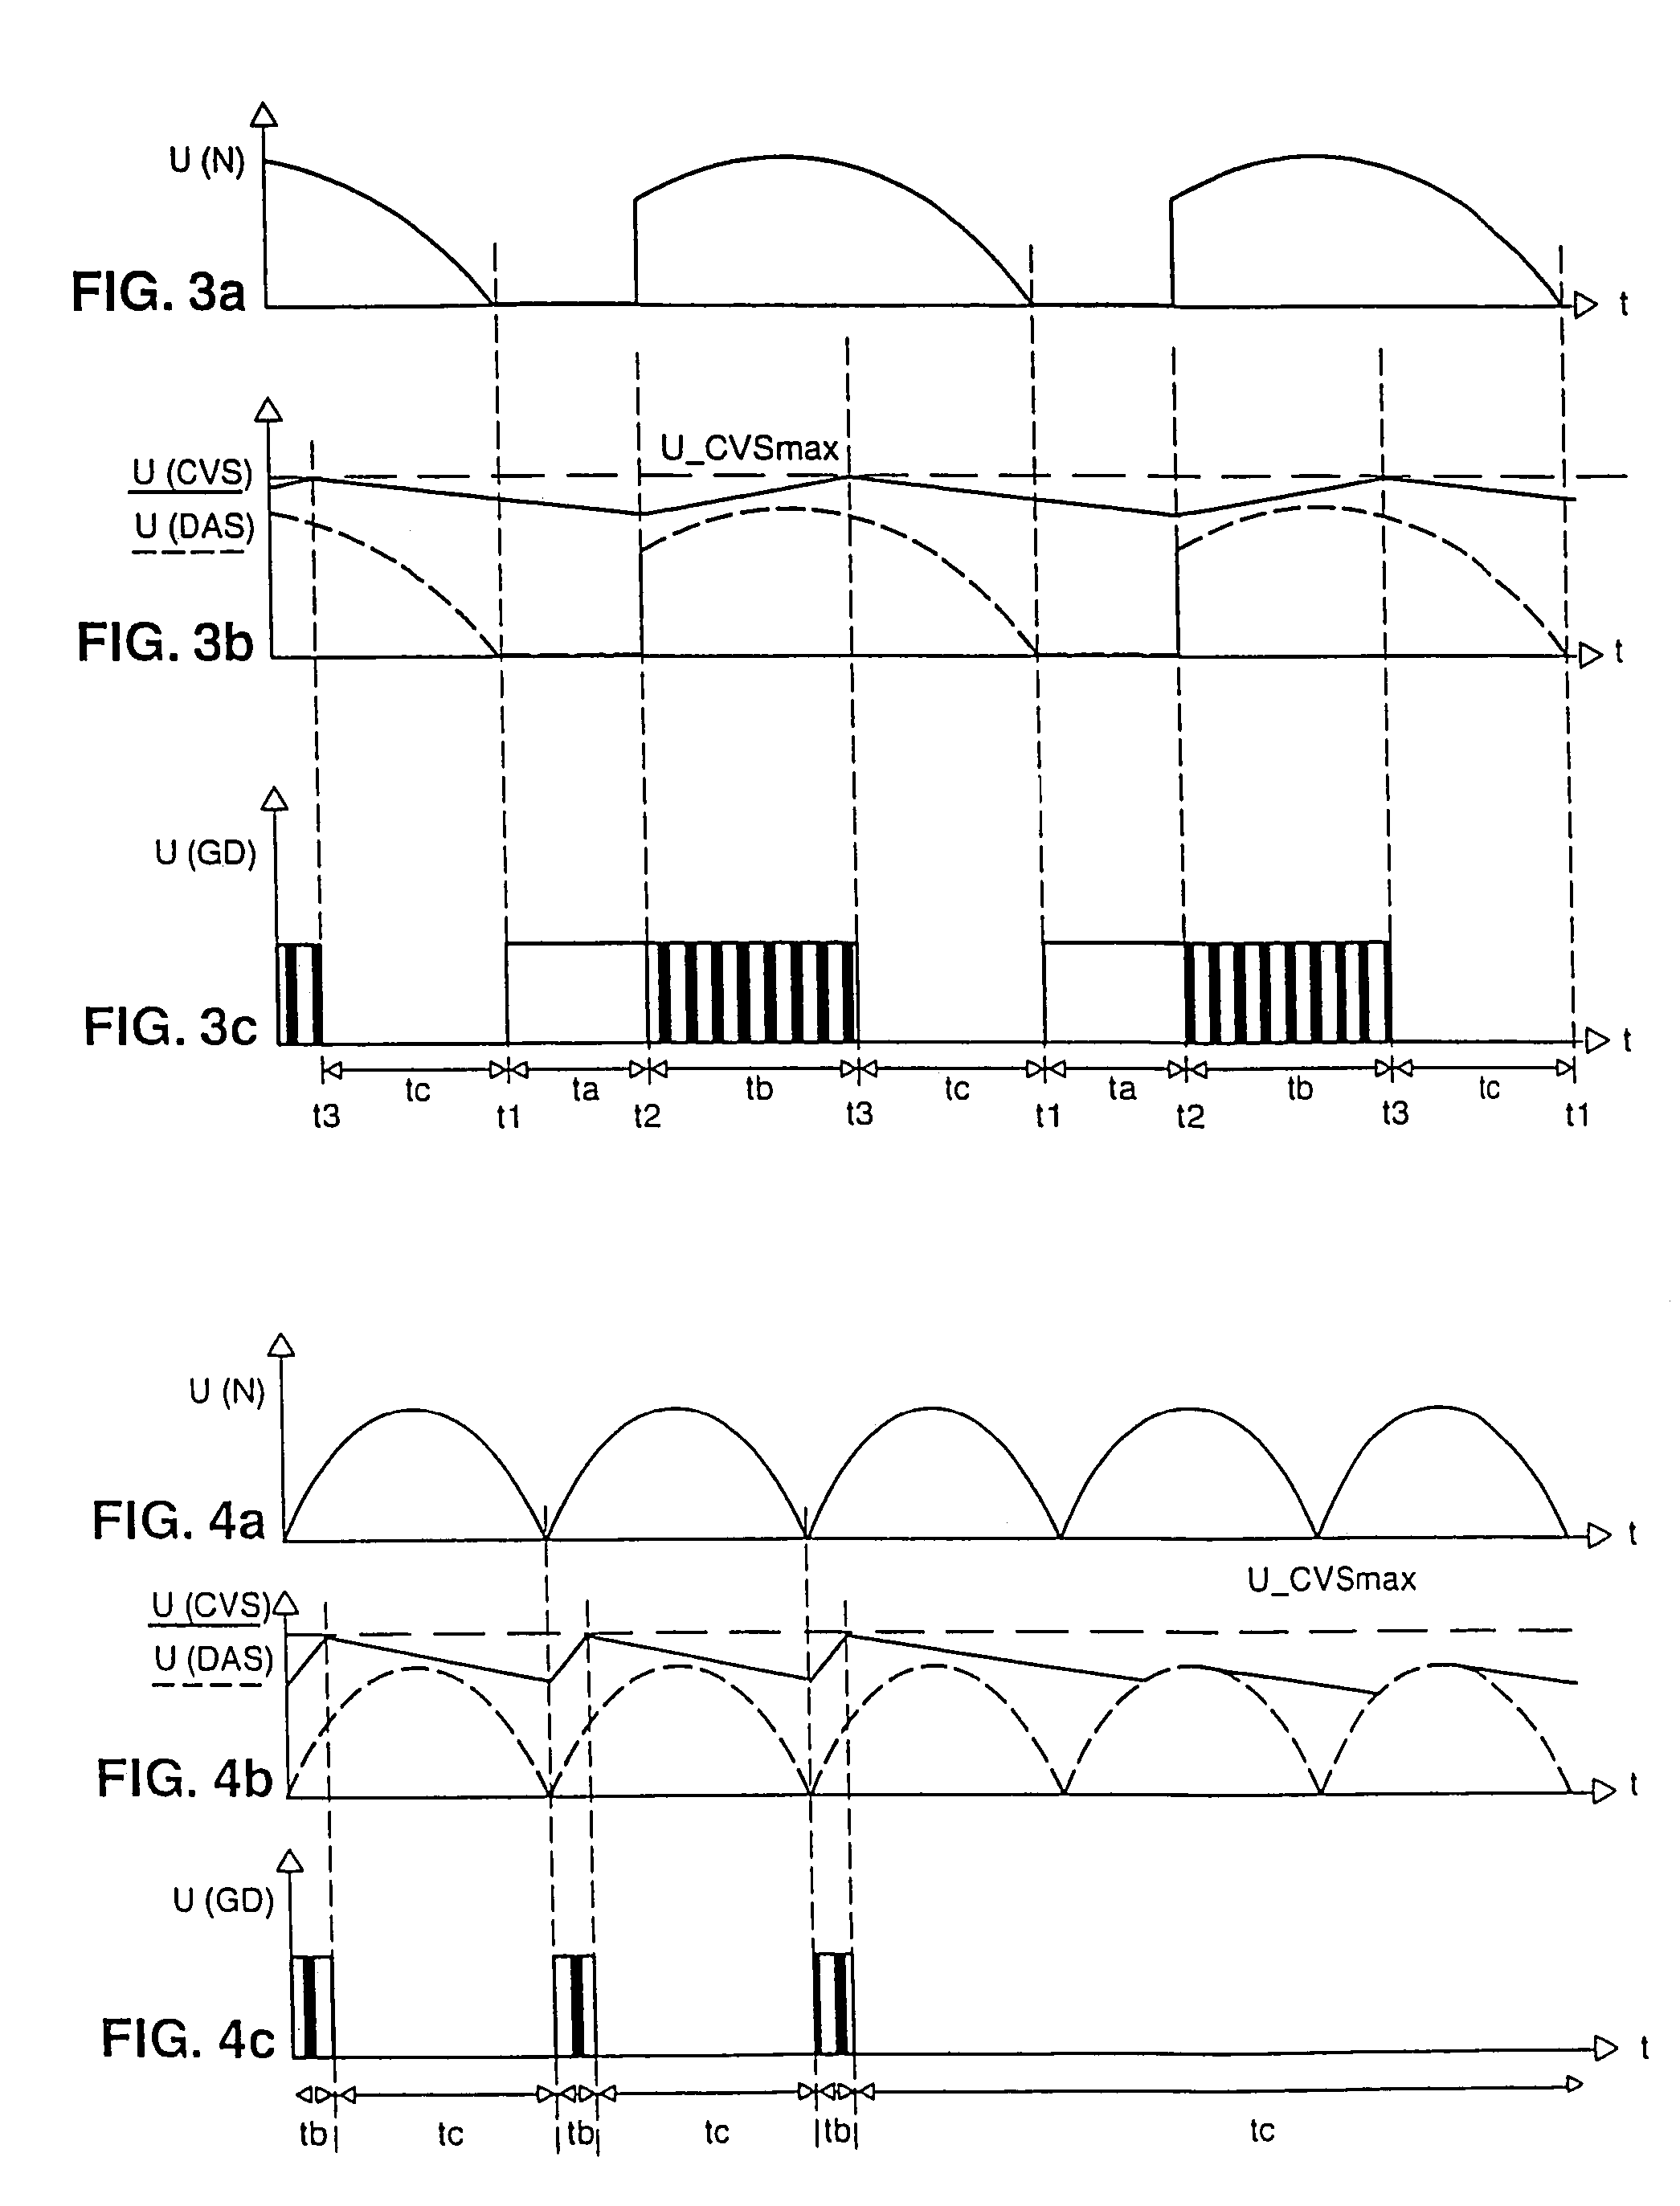 Method for varying the power consumption of capacitive loads